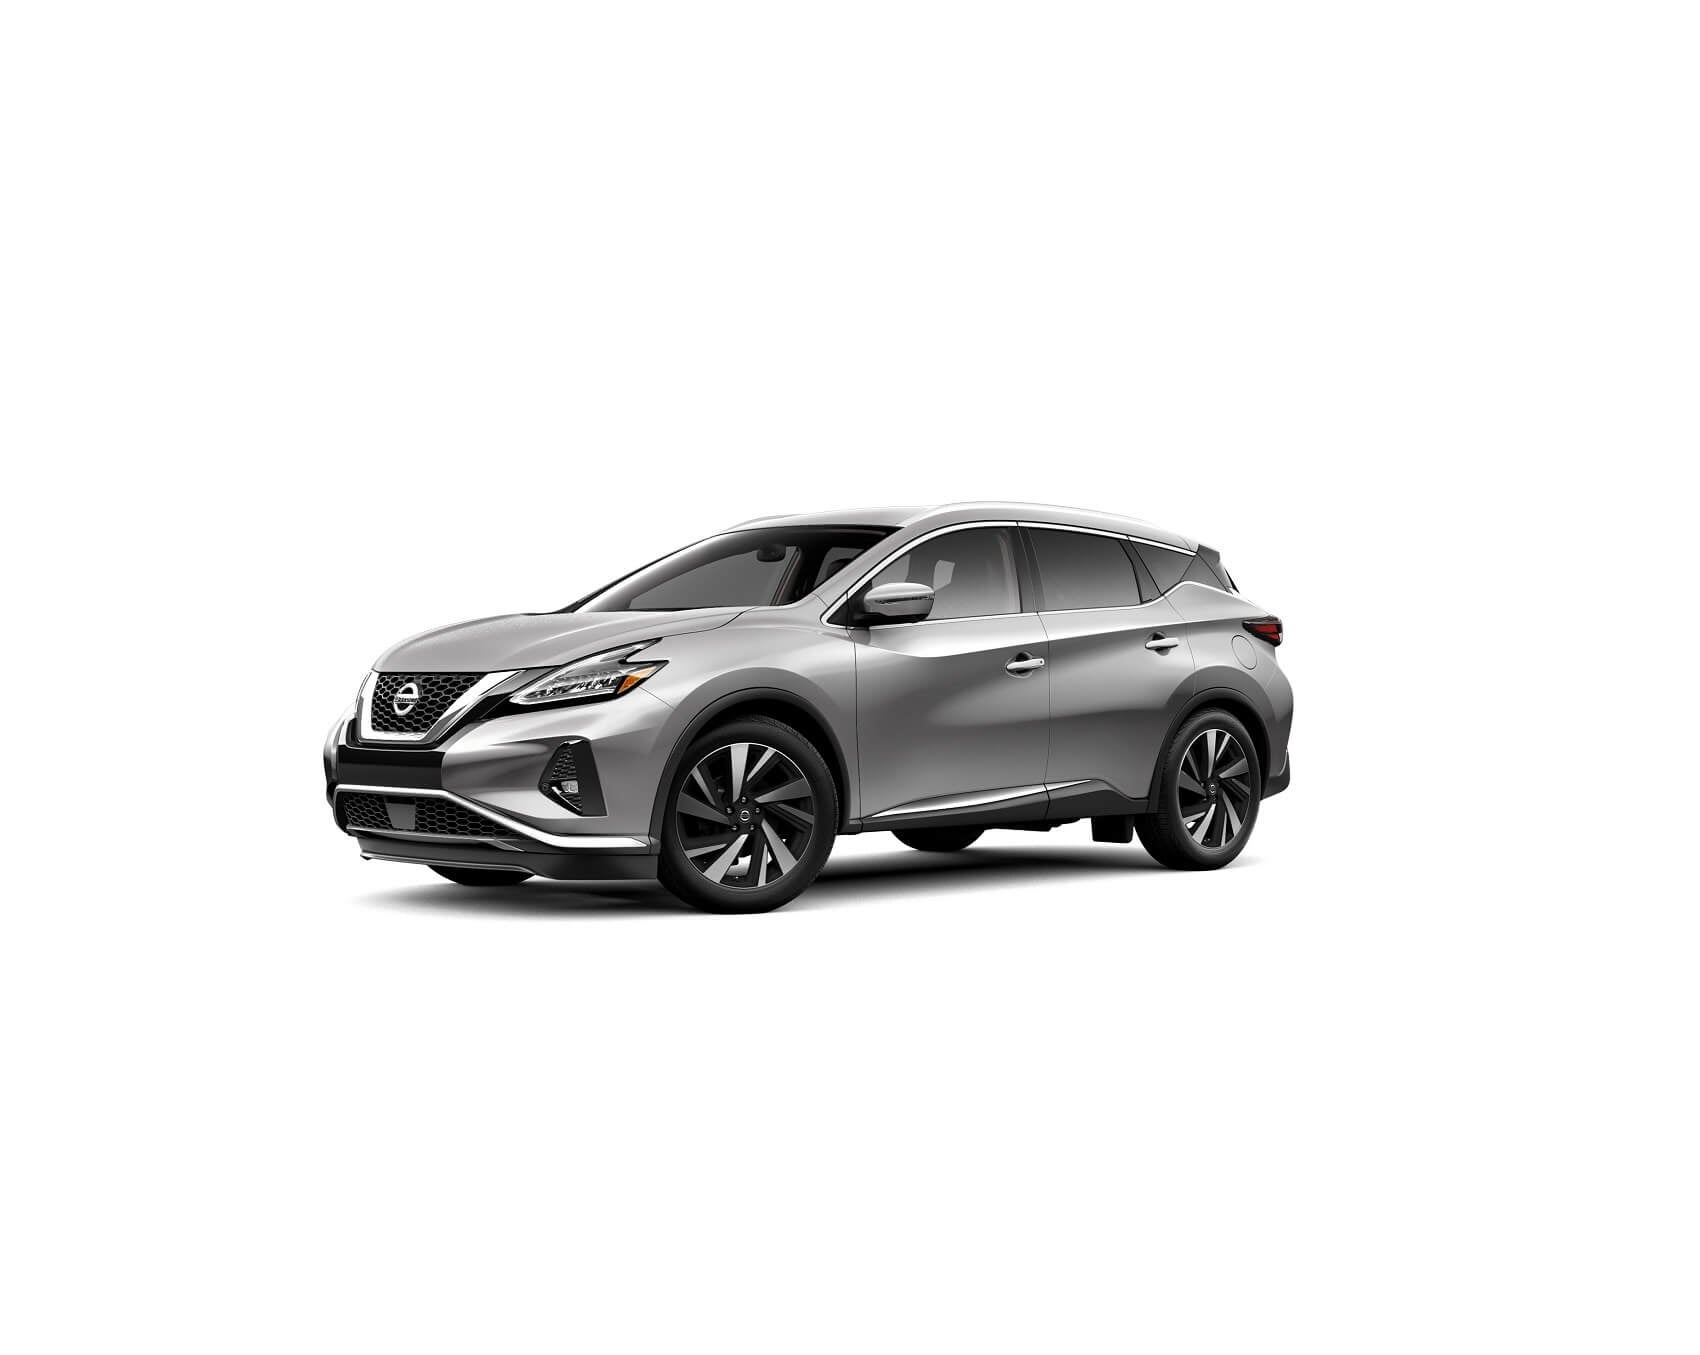 2021 NISSAN MURANO SAFETY RATINGS